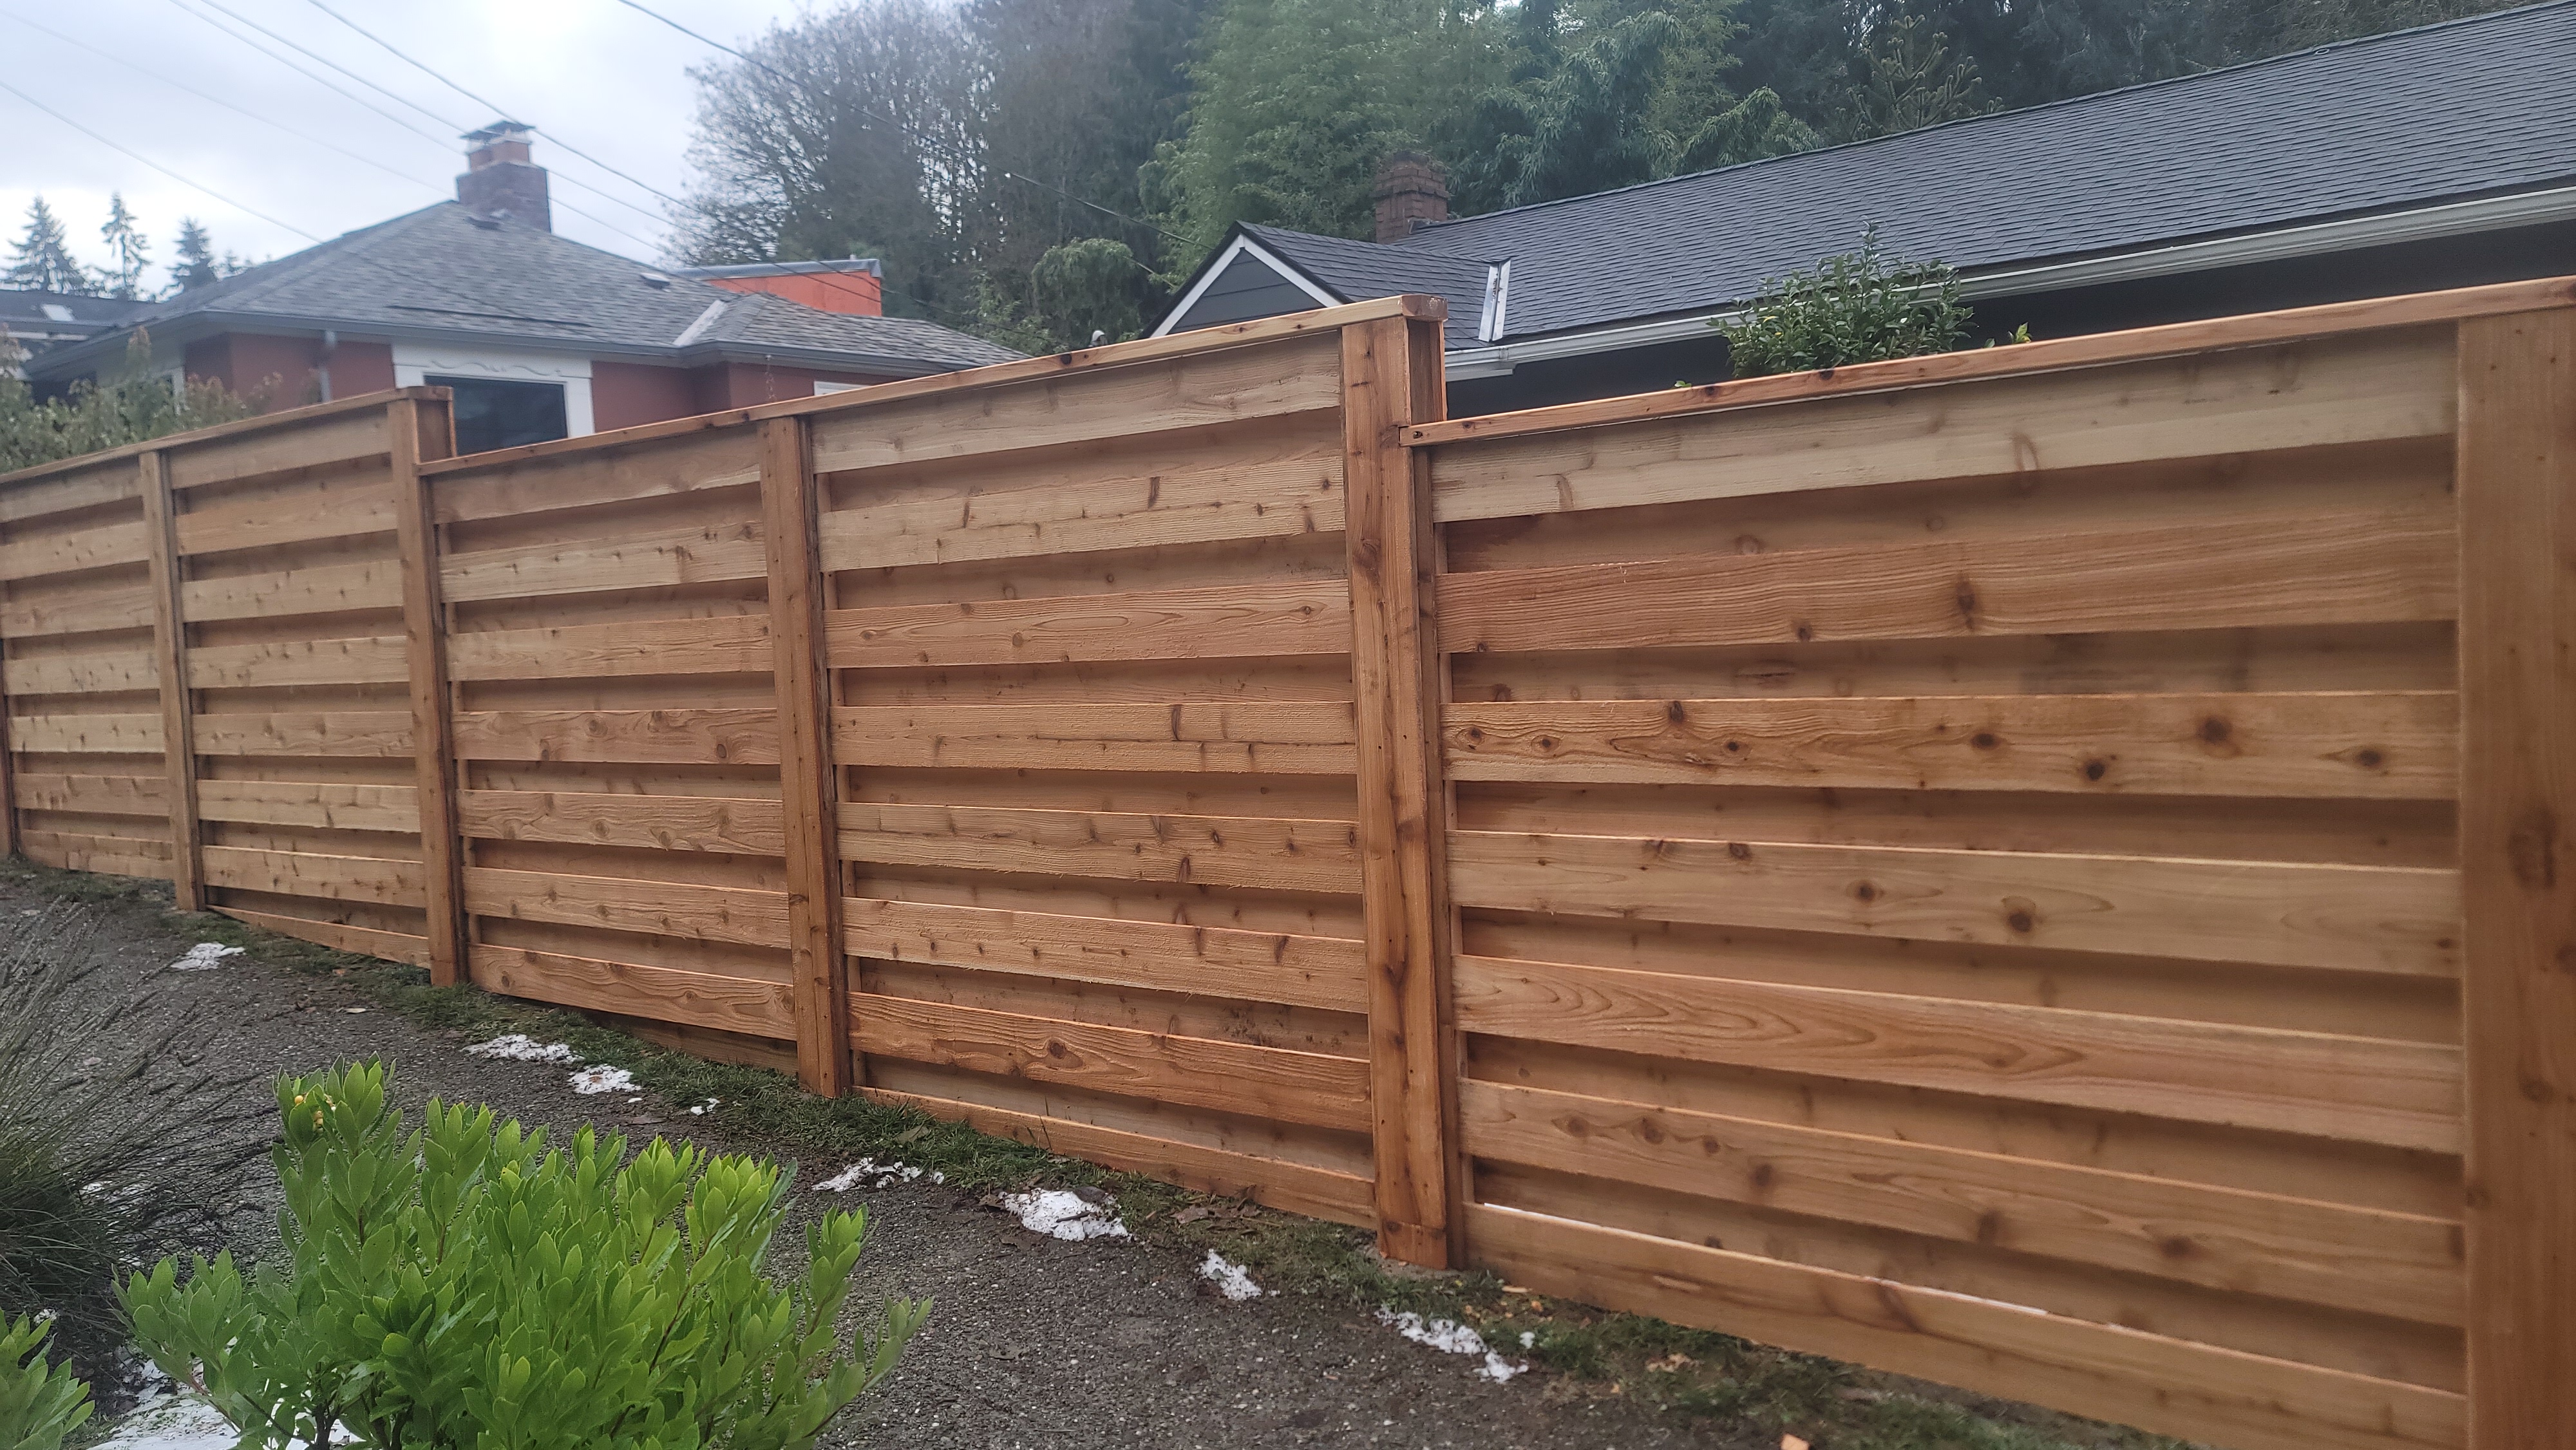 6'FT HORIZONTAL CEDAR FENCE WITH OVERLAPPED BOARDS.